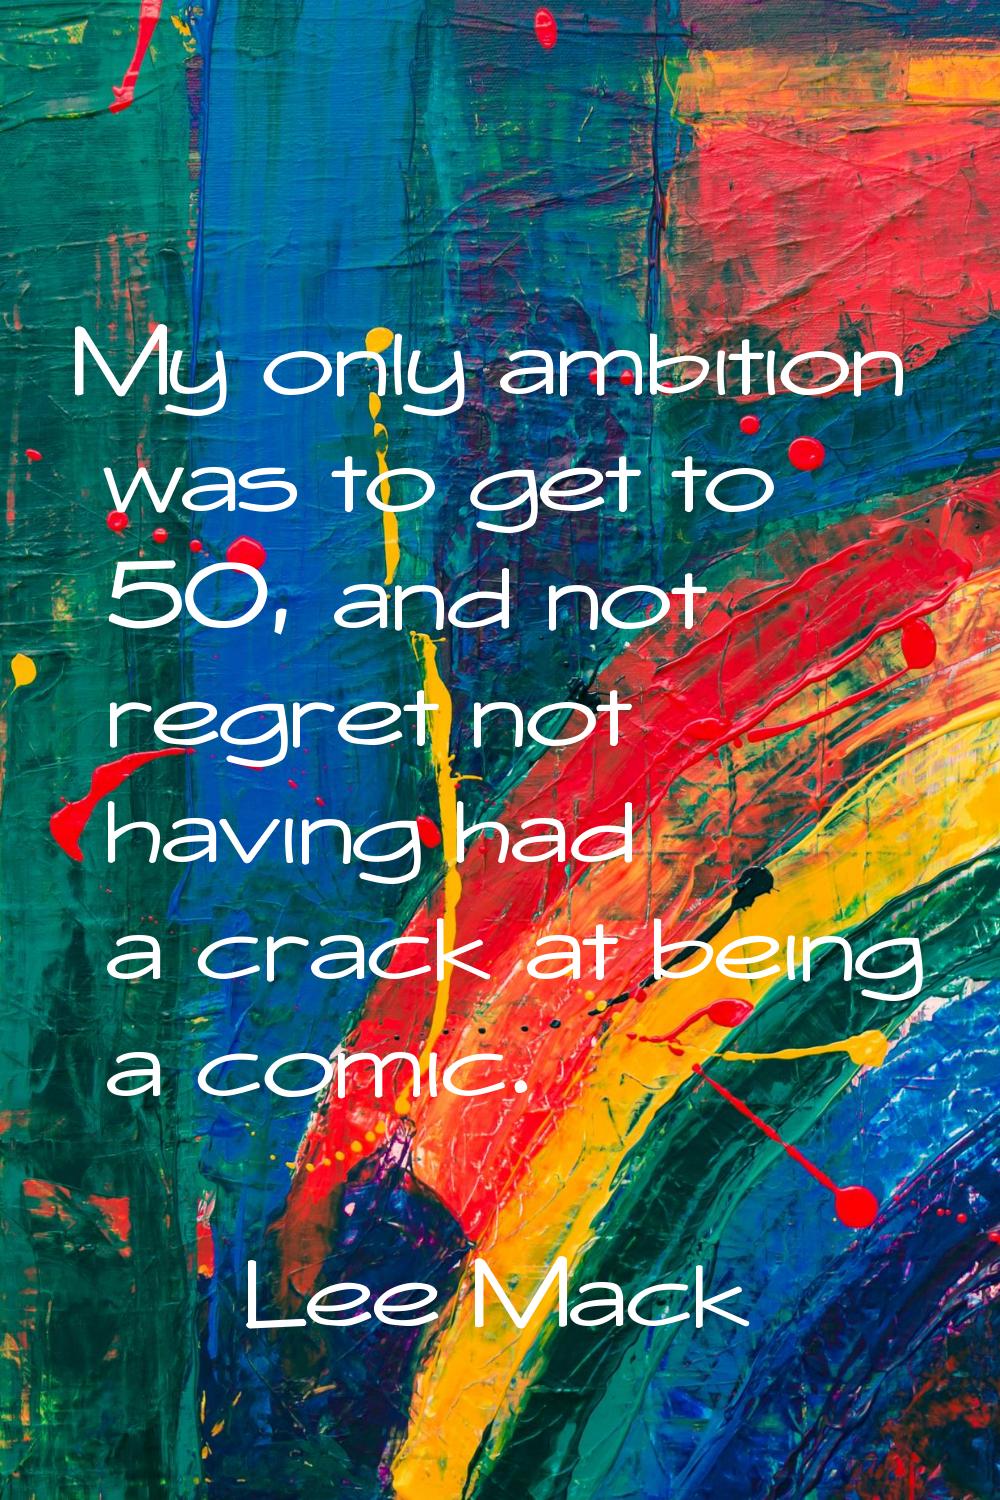 My only ambition was to get to 50, and not regret not having had a crack at being a comic.